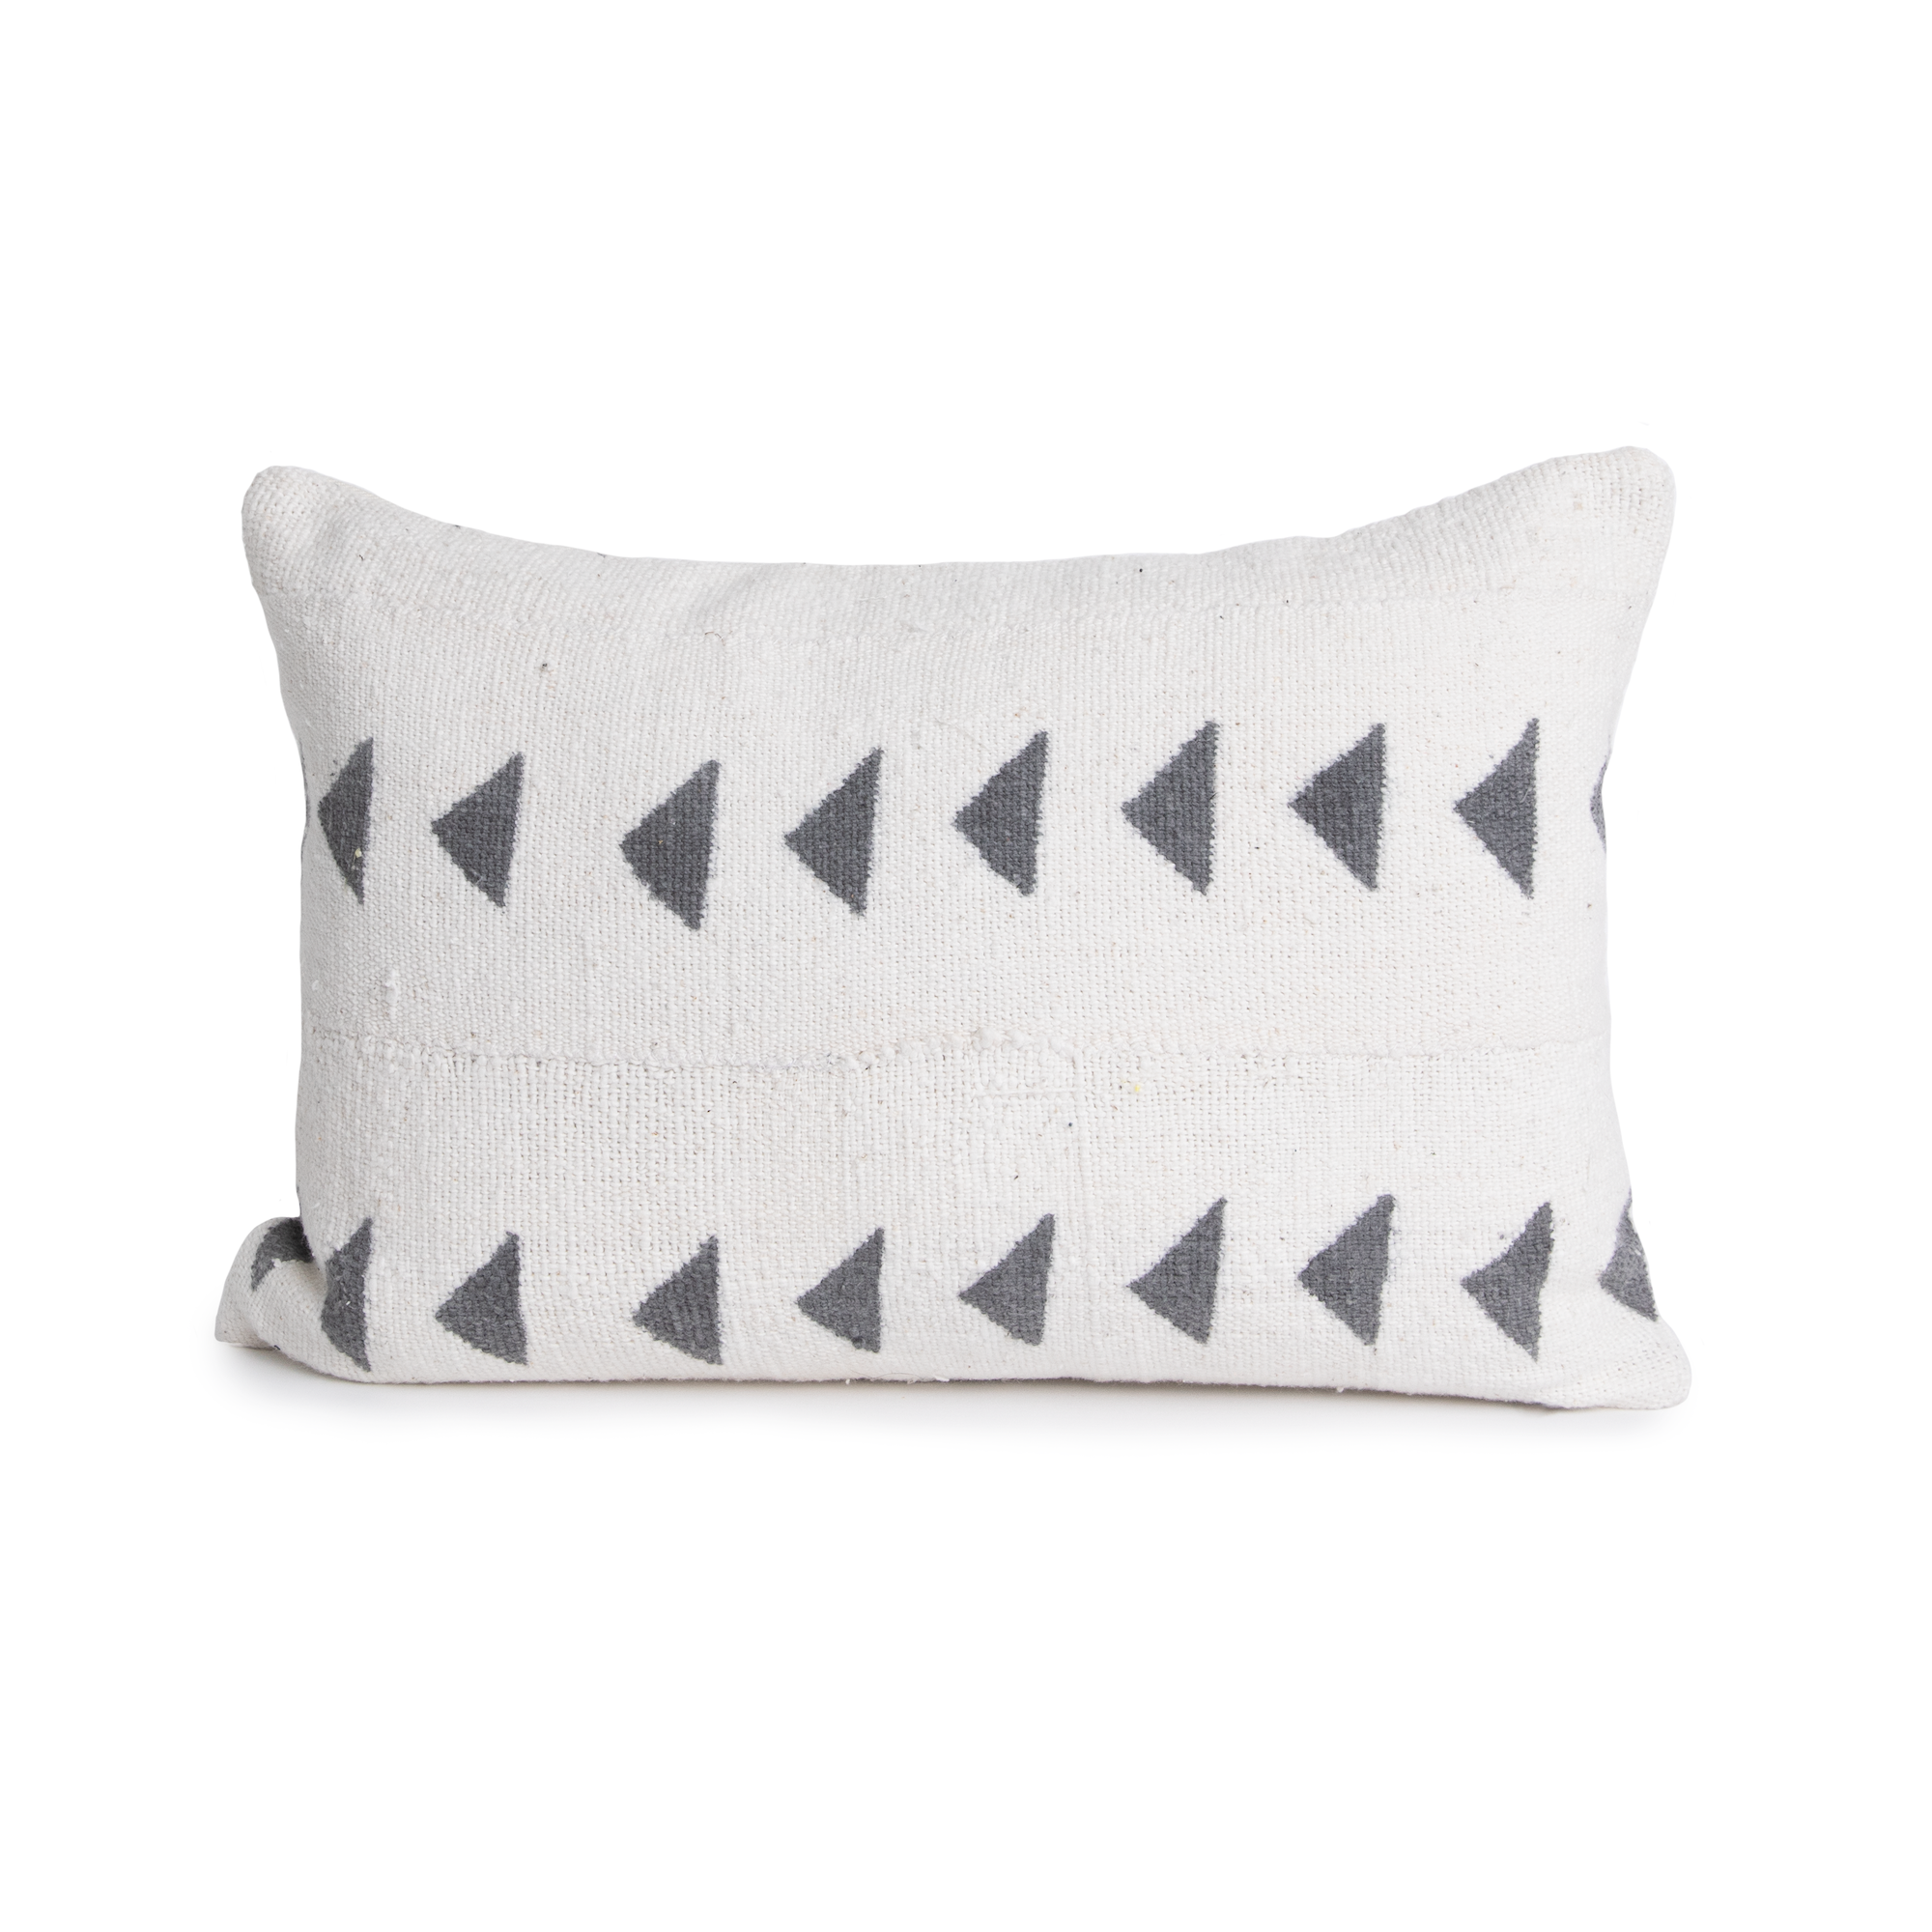 Kendall Mud Cloth Pillow Cover